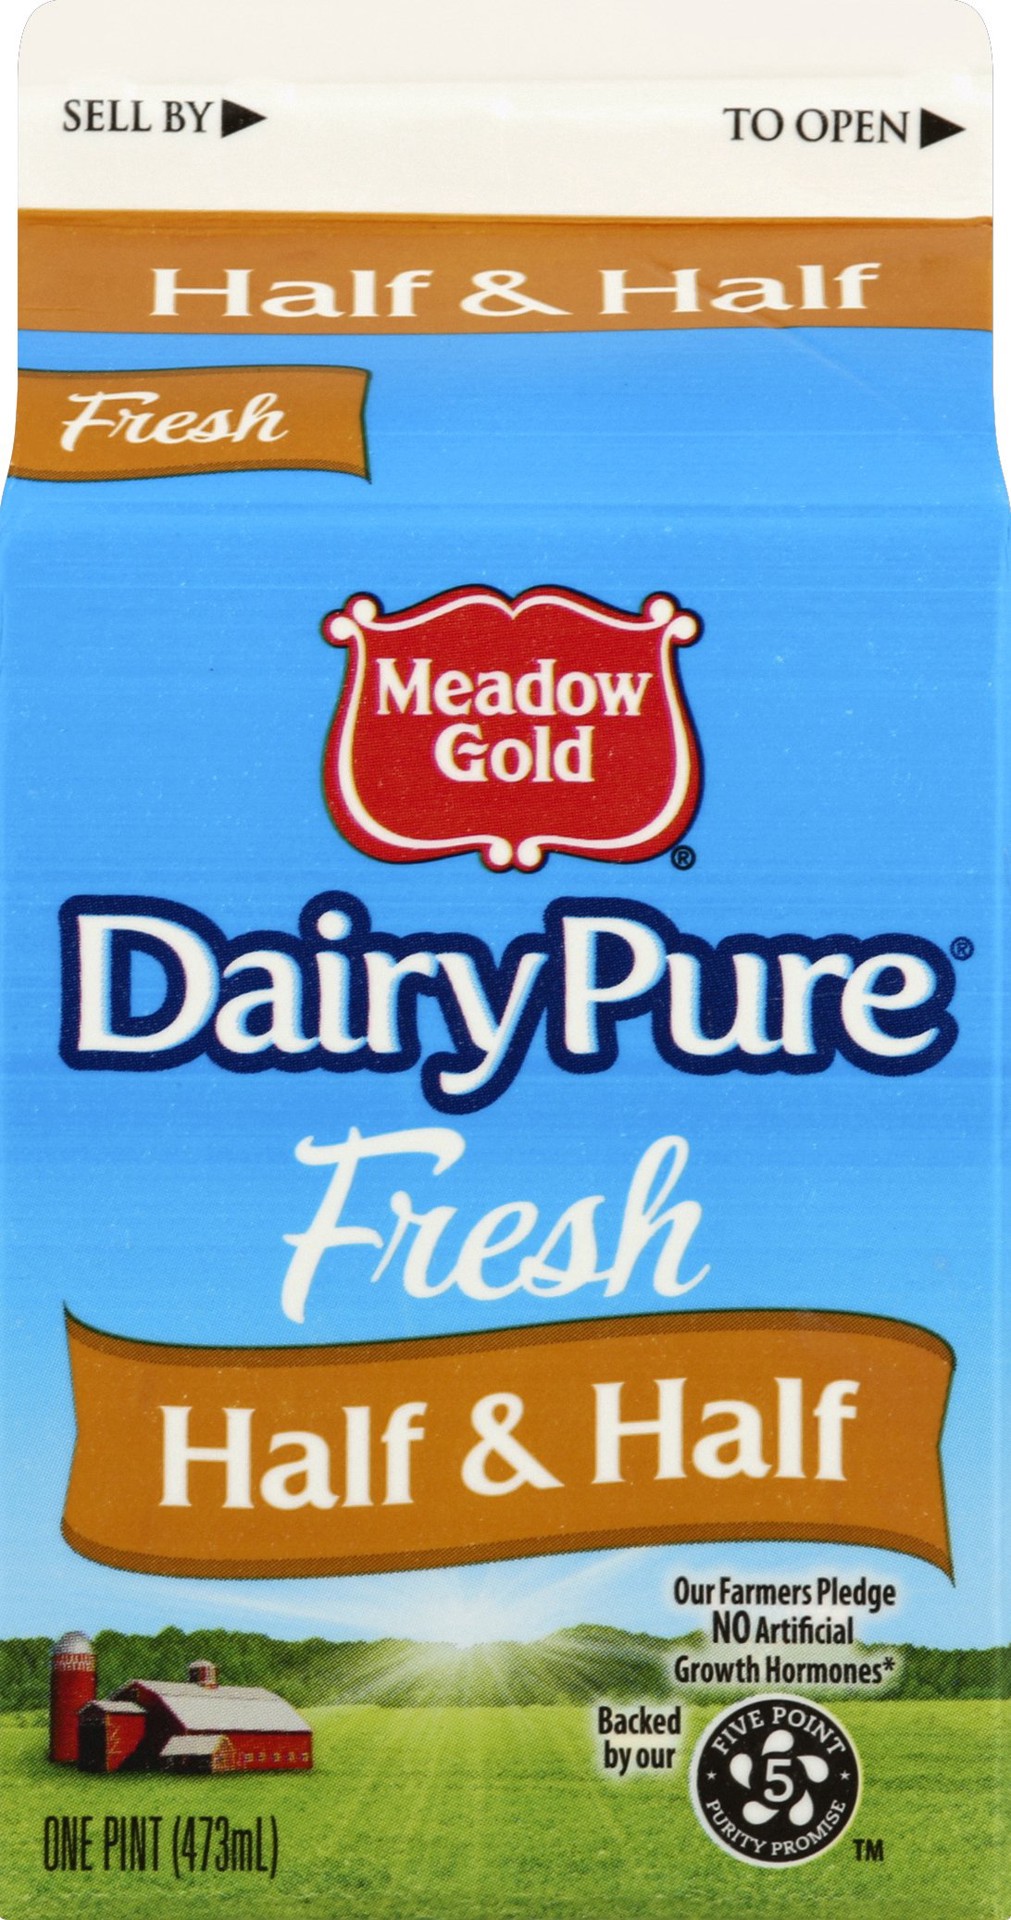 slide 1 of 5, Dairy Pure Meadow Gold DairyPure Half and Half - 1 Pint, 1 pint